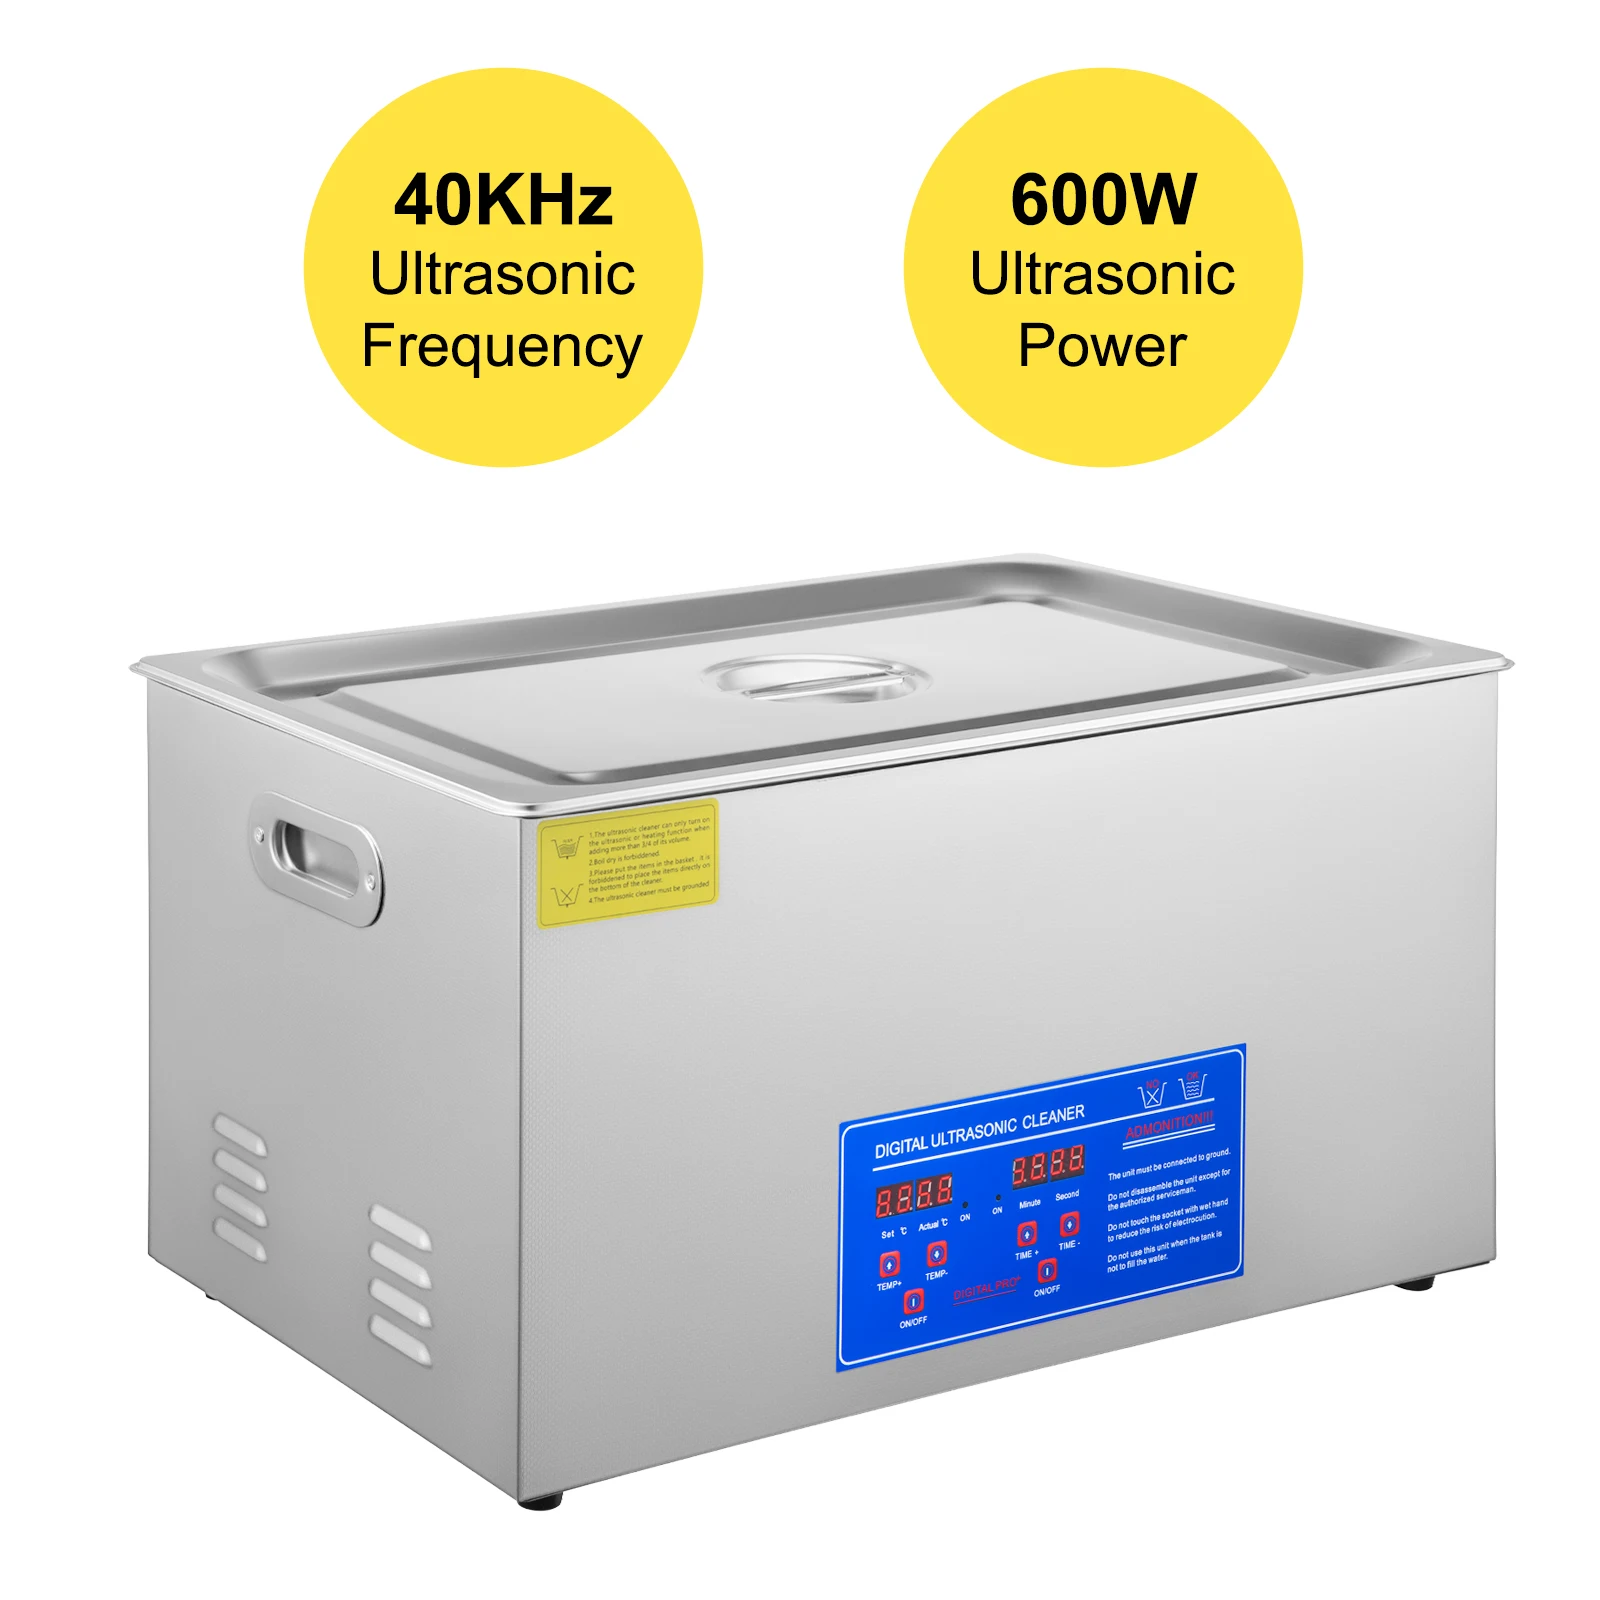 H6804aa113ce7413e8d8d773bae9db97fF VEVOR 1.3L 2L 3L 6L 10L 15L 22L 30L Ultrasonic Cleaner Lave-Dishes Portable Washing Machine Diswasher Ultrasound Home Appliances